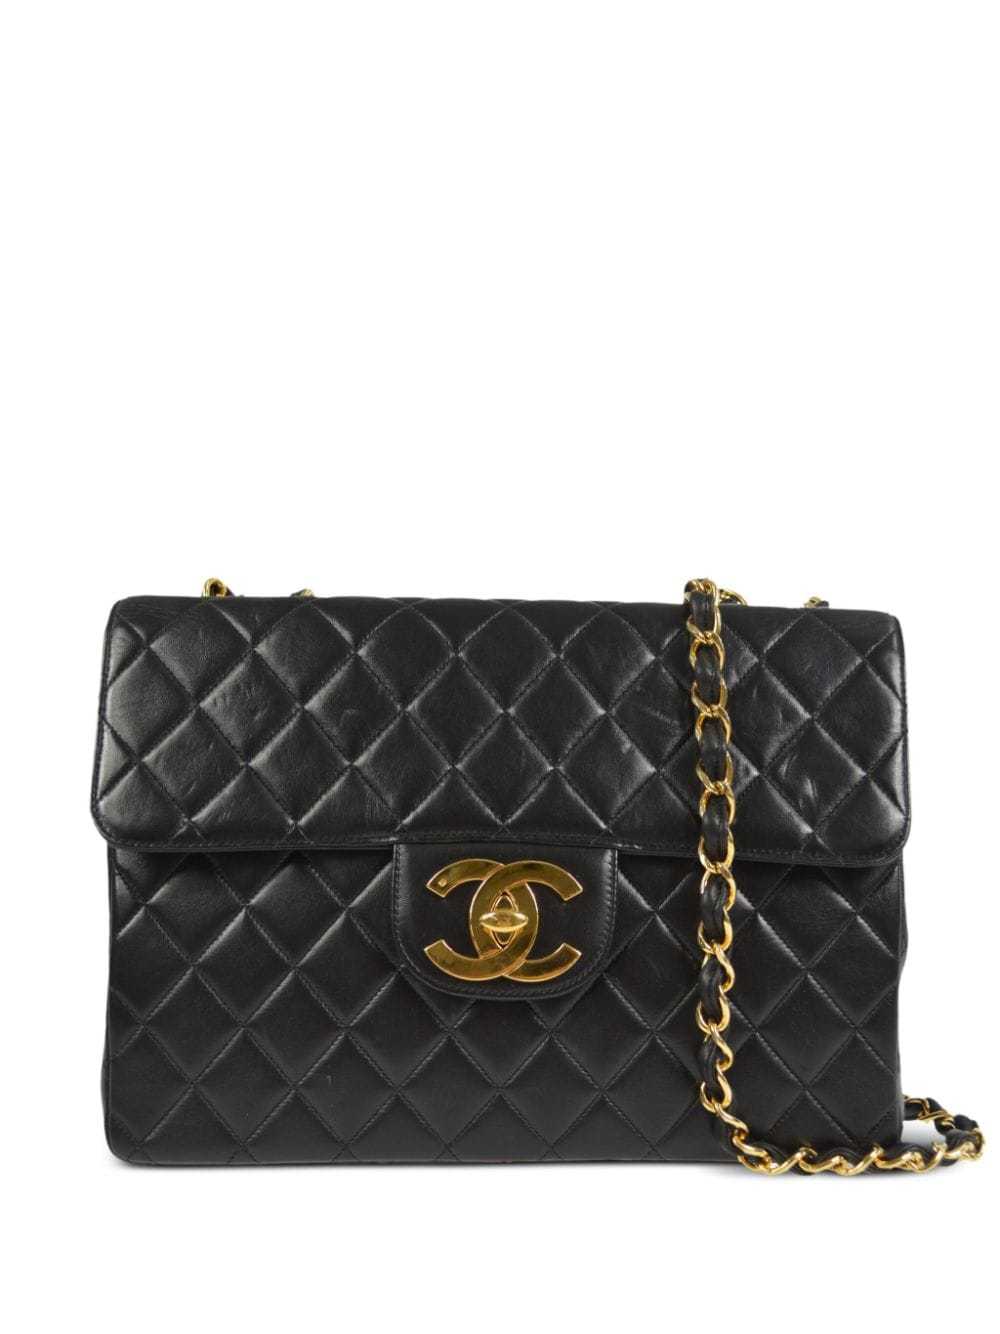 Chanel pre-owned 1995 classic - Gem